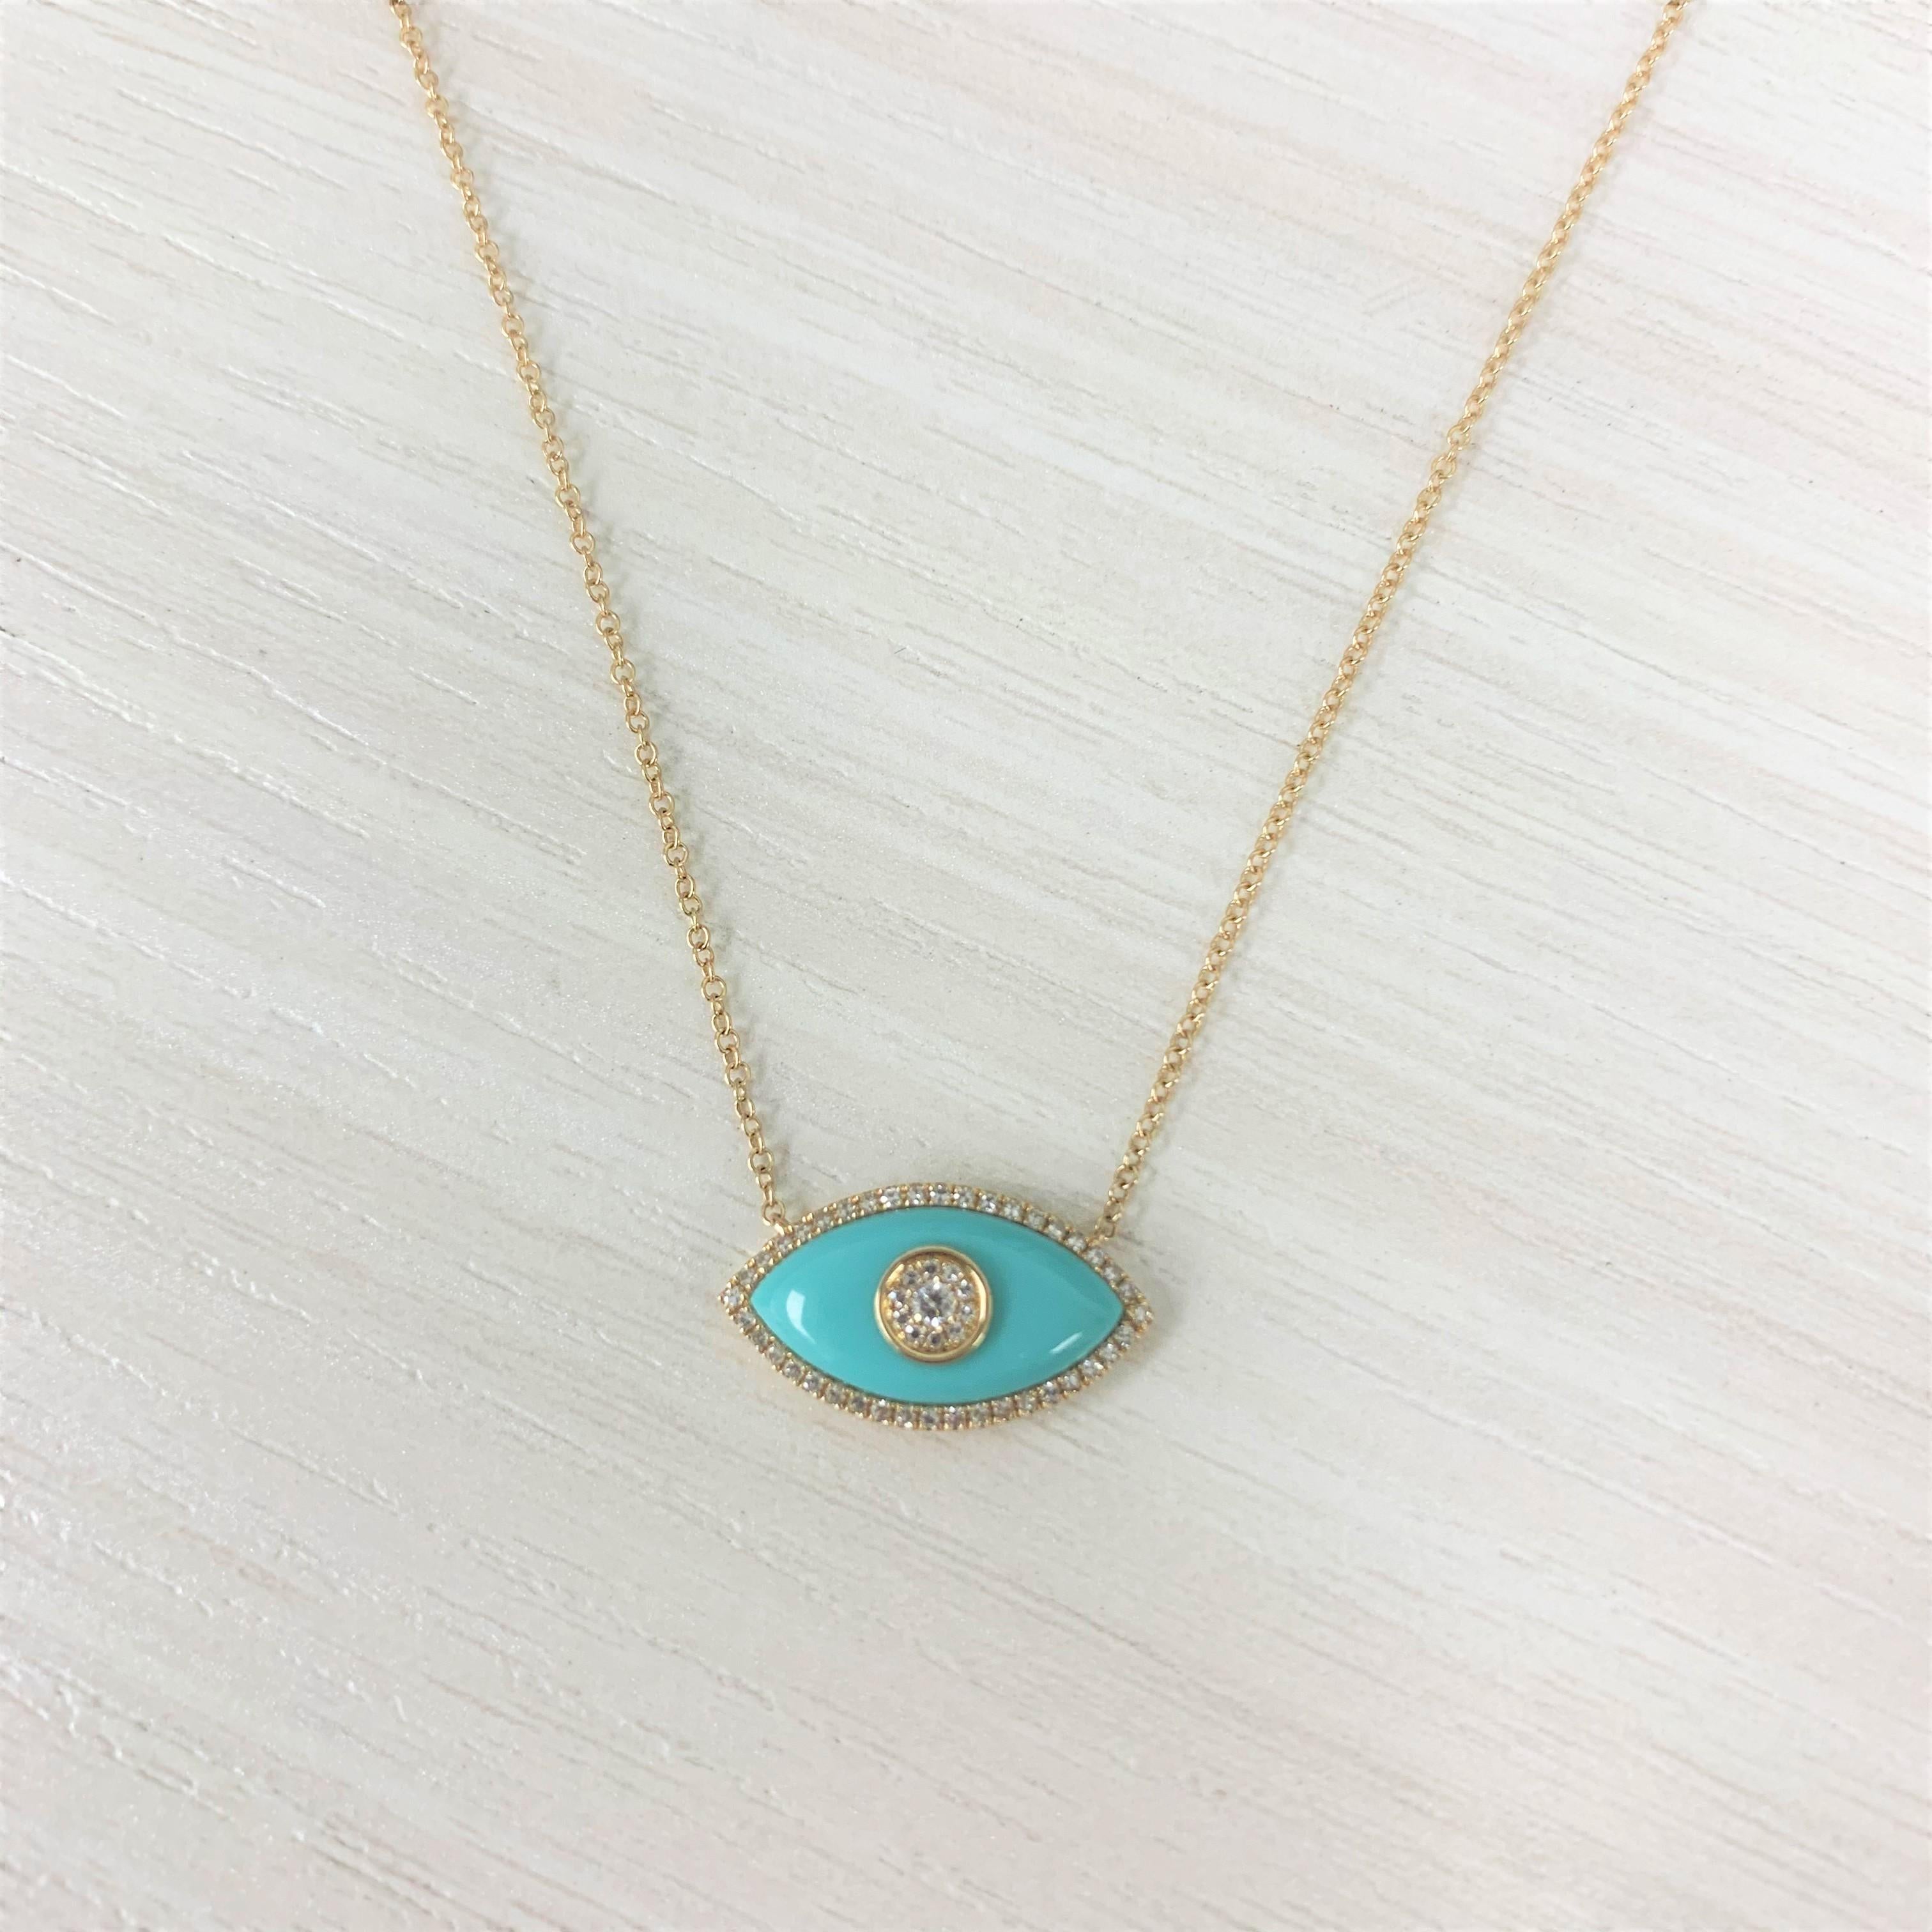 Feel Protected and Guarded with this Evil Eye Necklace! Crafted of 14K Gold this pendant features 0.19 carats of natural white Diamonds and 1.98 carats of Turquoise. Comes on an 16